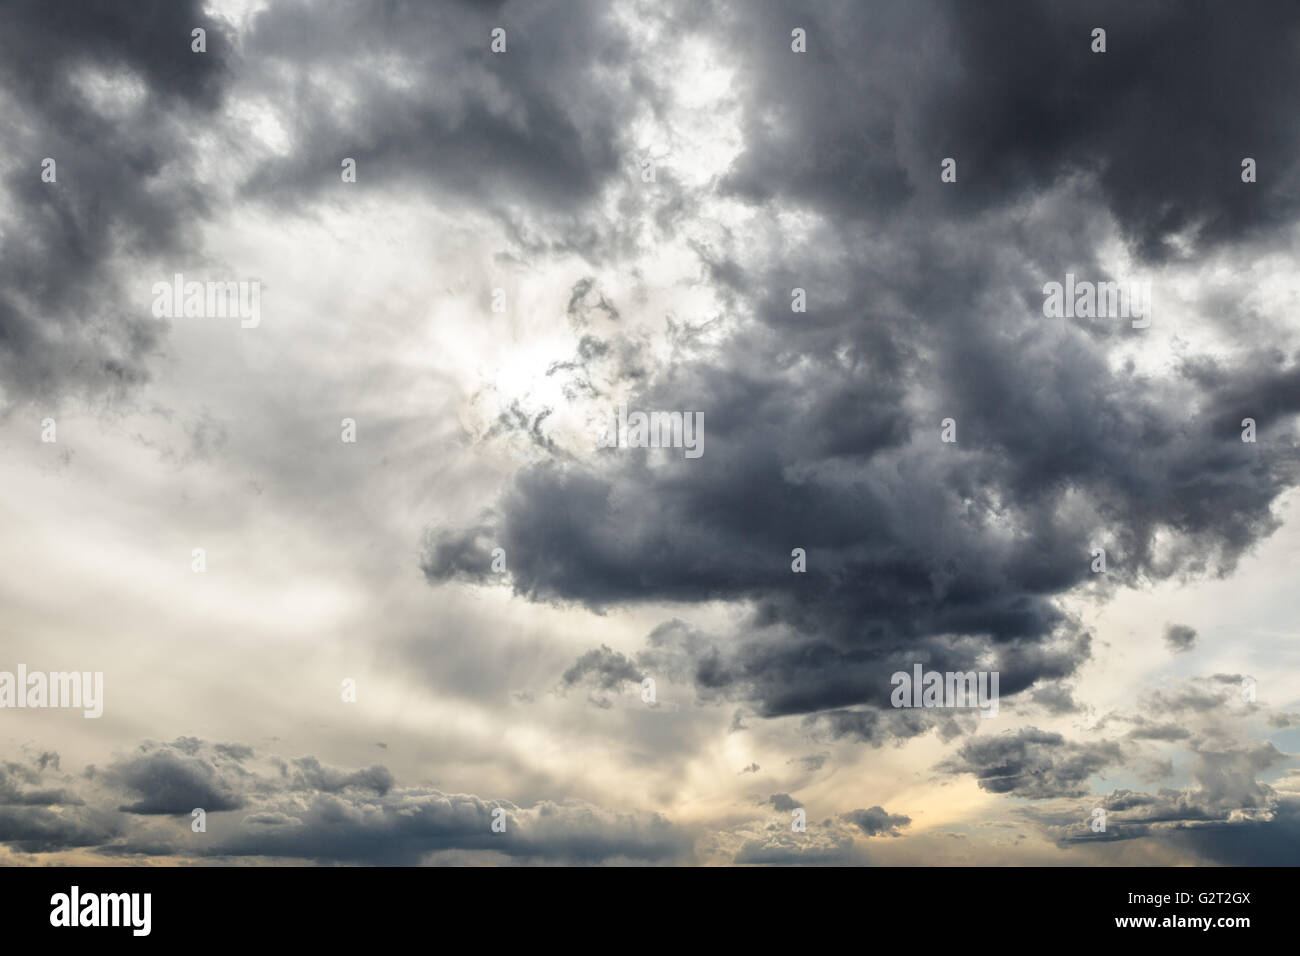 Stormy grey cloudy sky as the background Stock Photo